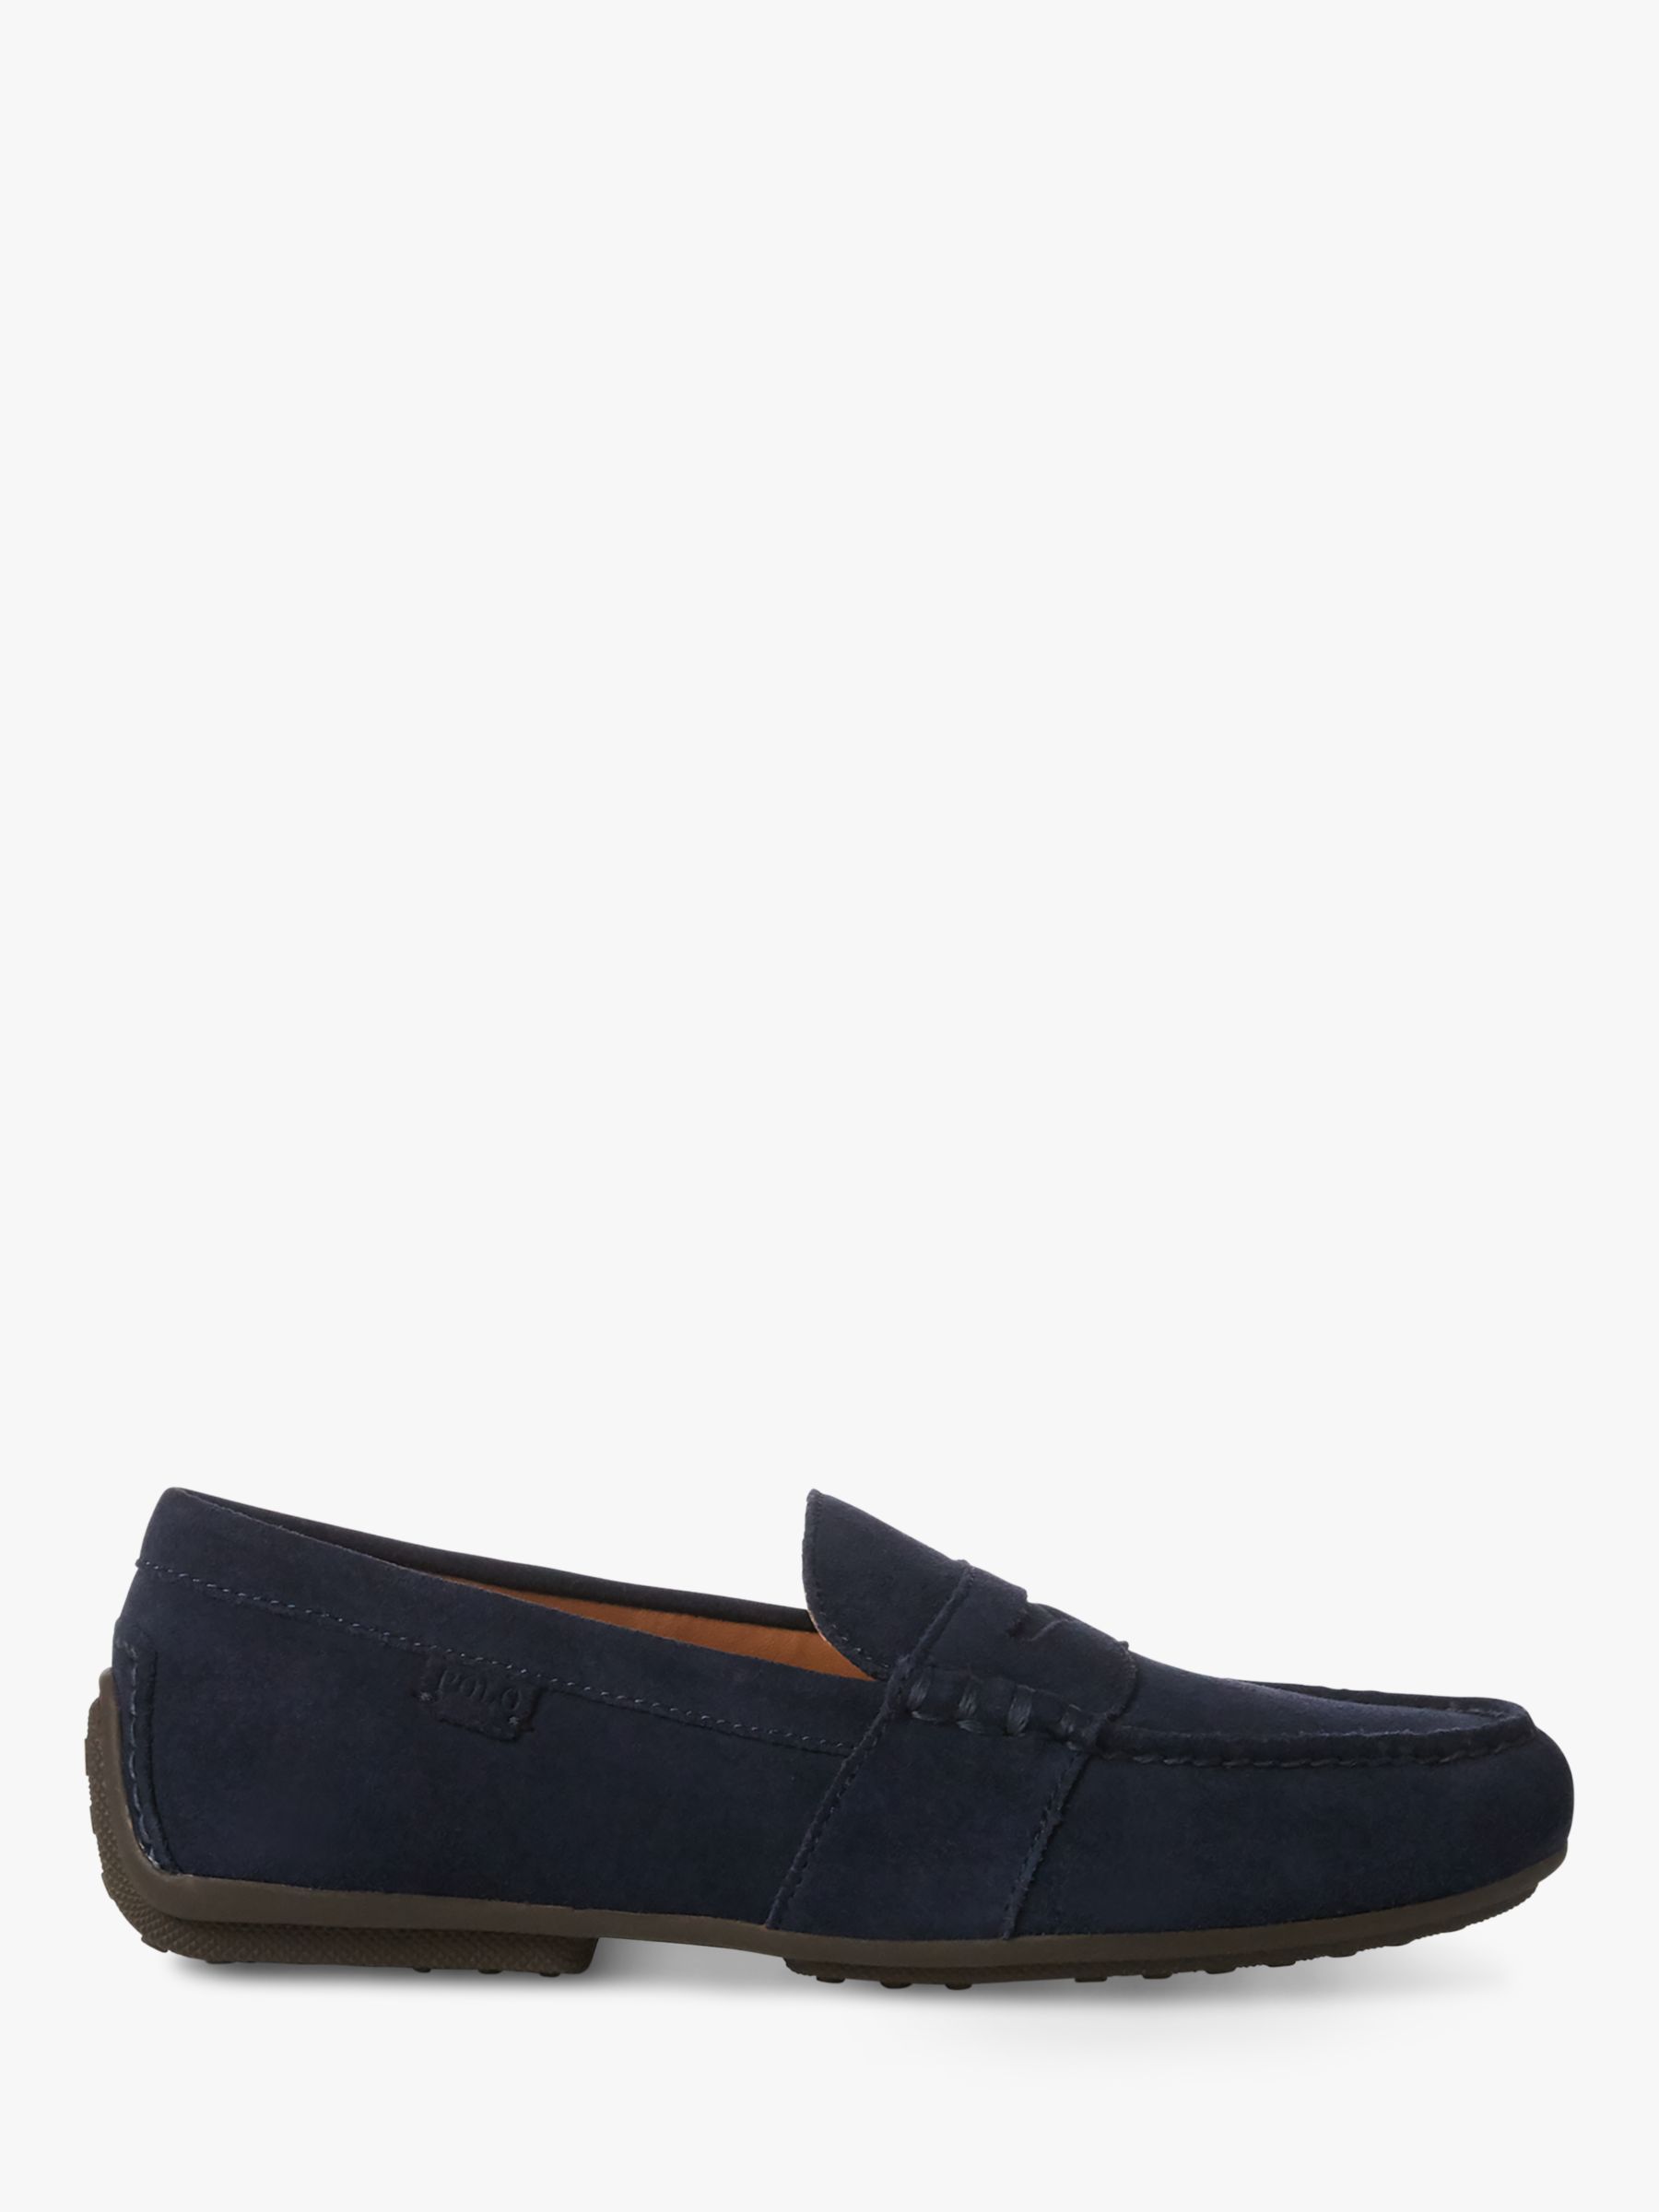 Polo Ralph Lauren Reynold Suede Driving Shoes